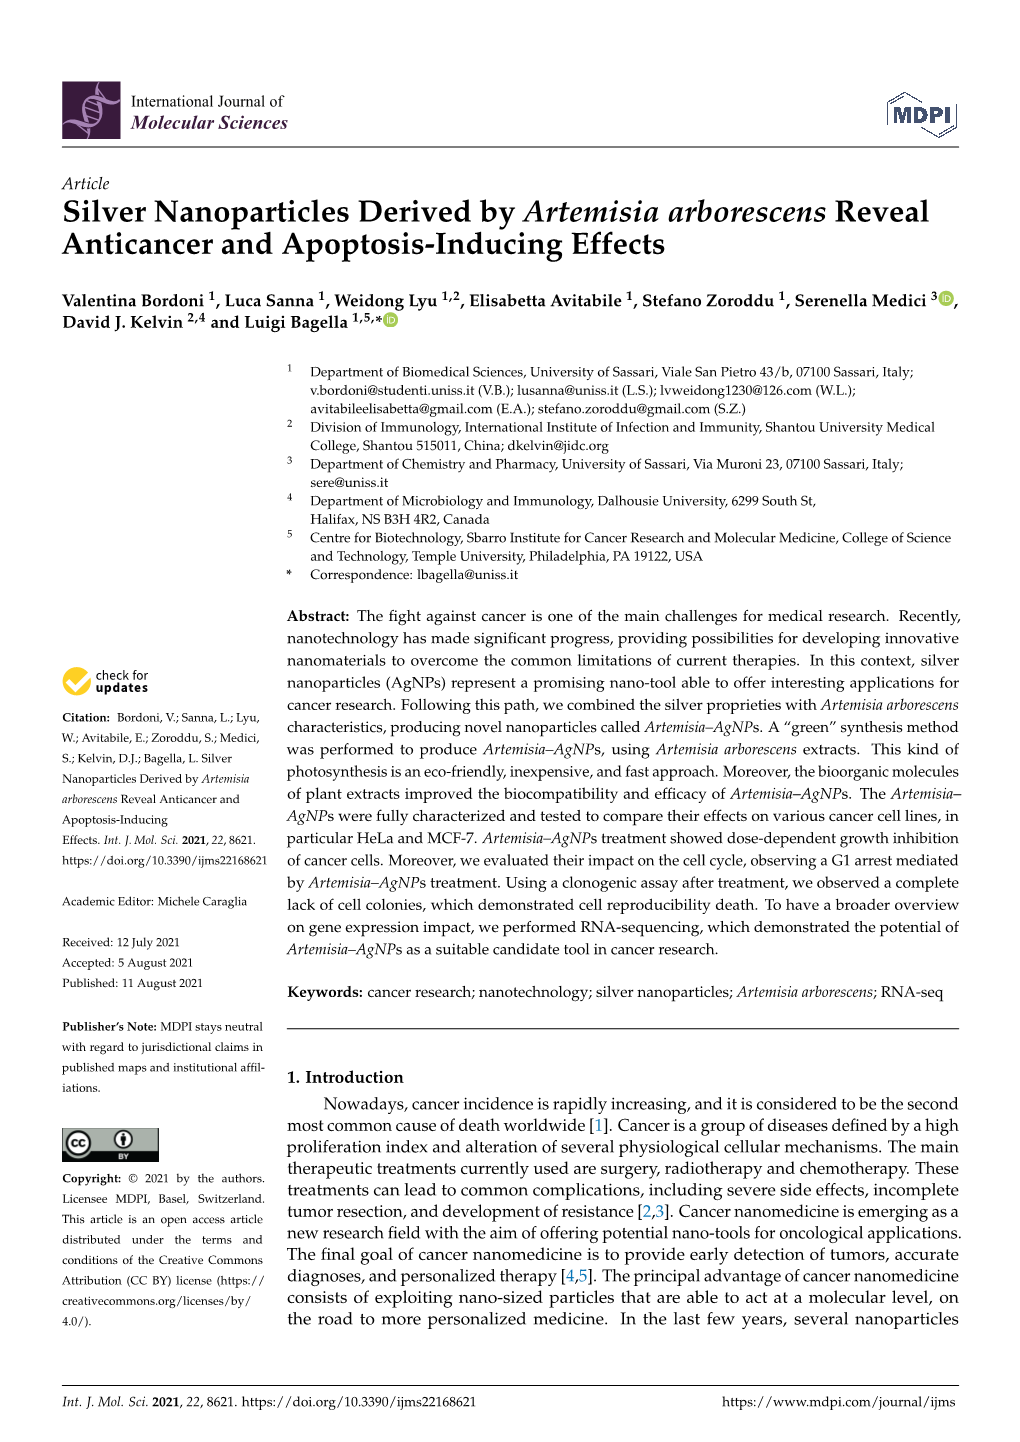 Silver Nanoparticles Derived by Artemisia Arborescens Reveal Anticancer and Apoptosis-Inducing Effects